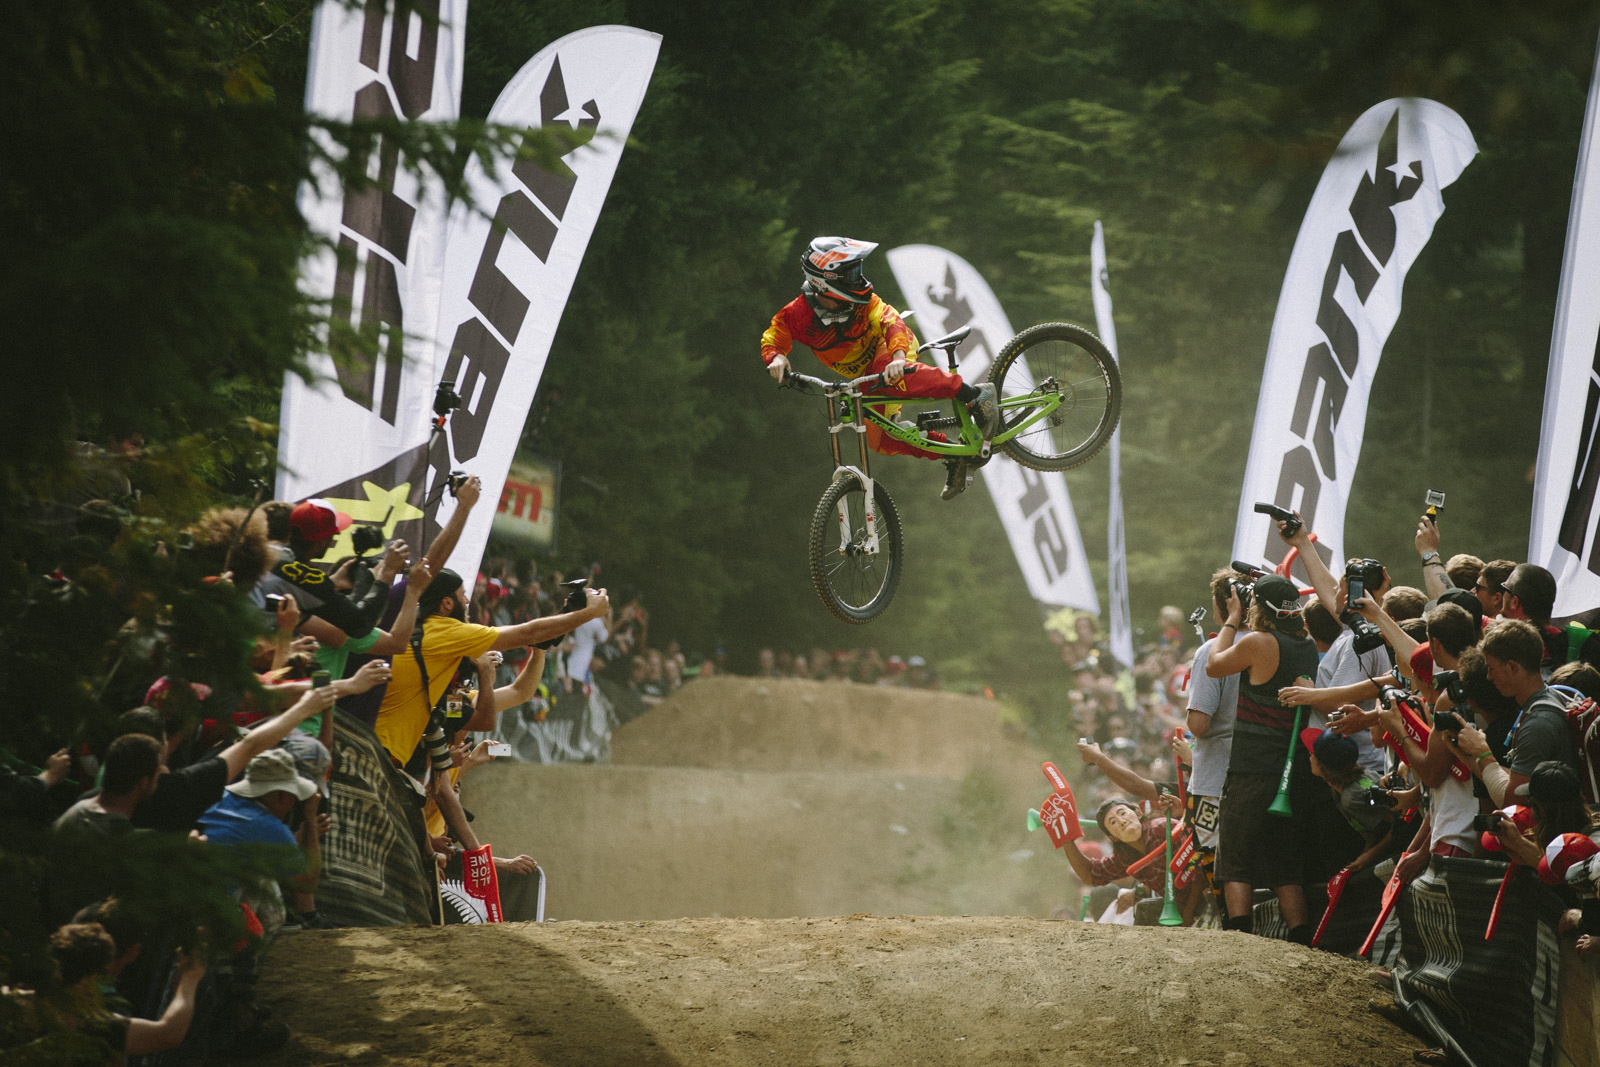 at the Official Whip off Worlds, Crankworx 2014, Whistler, British Columbia, Canada